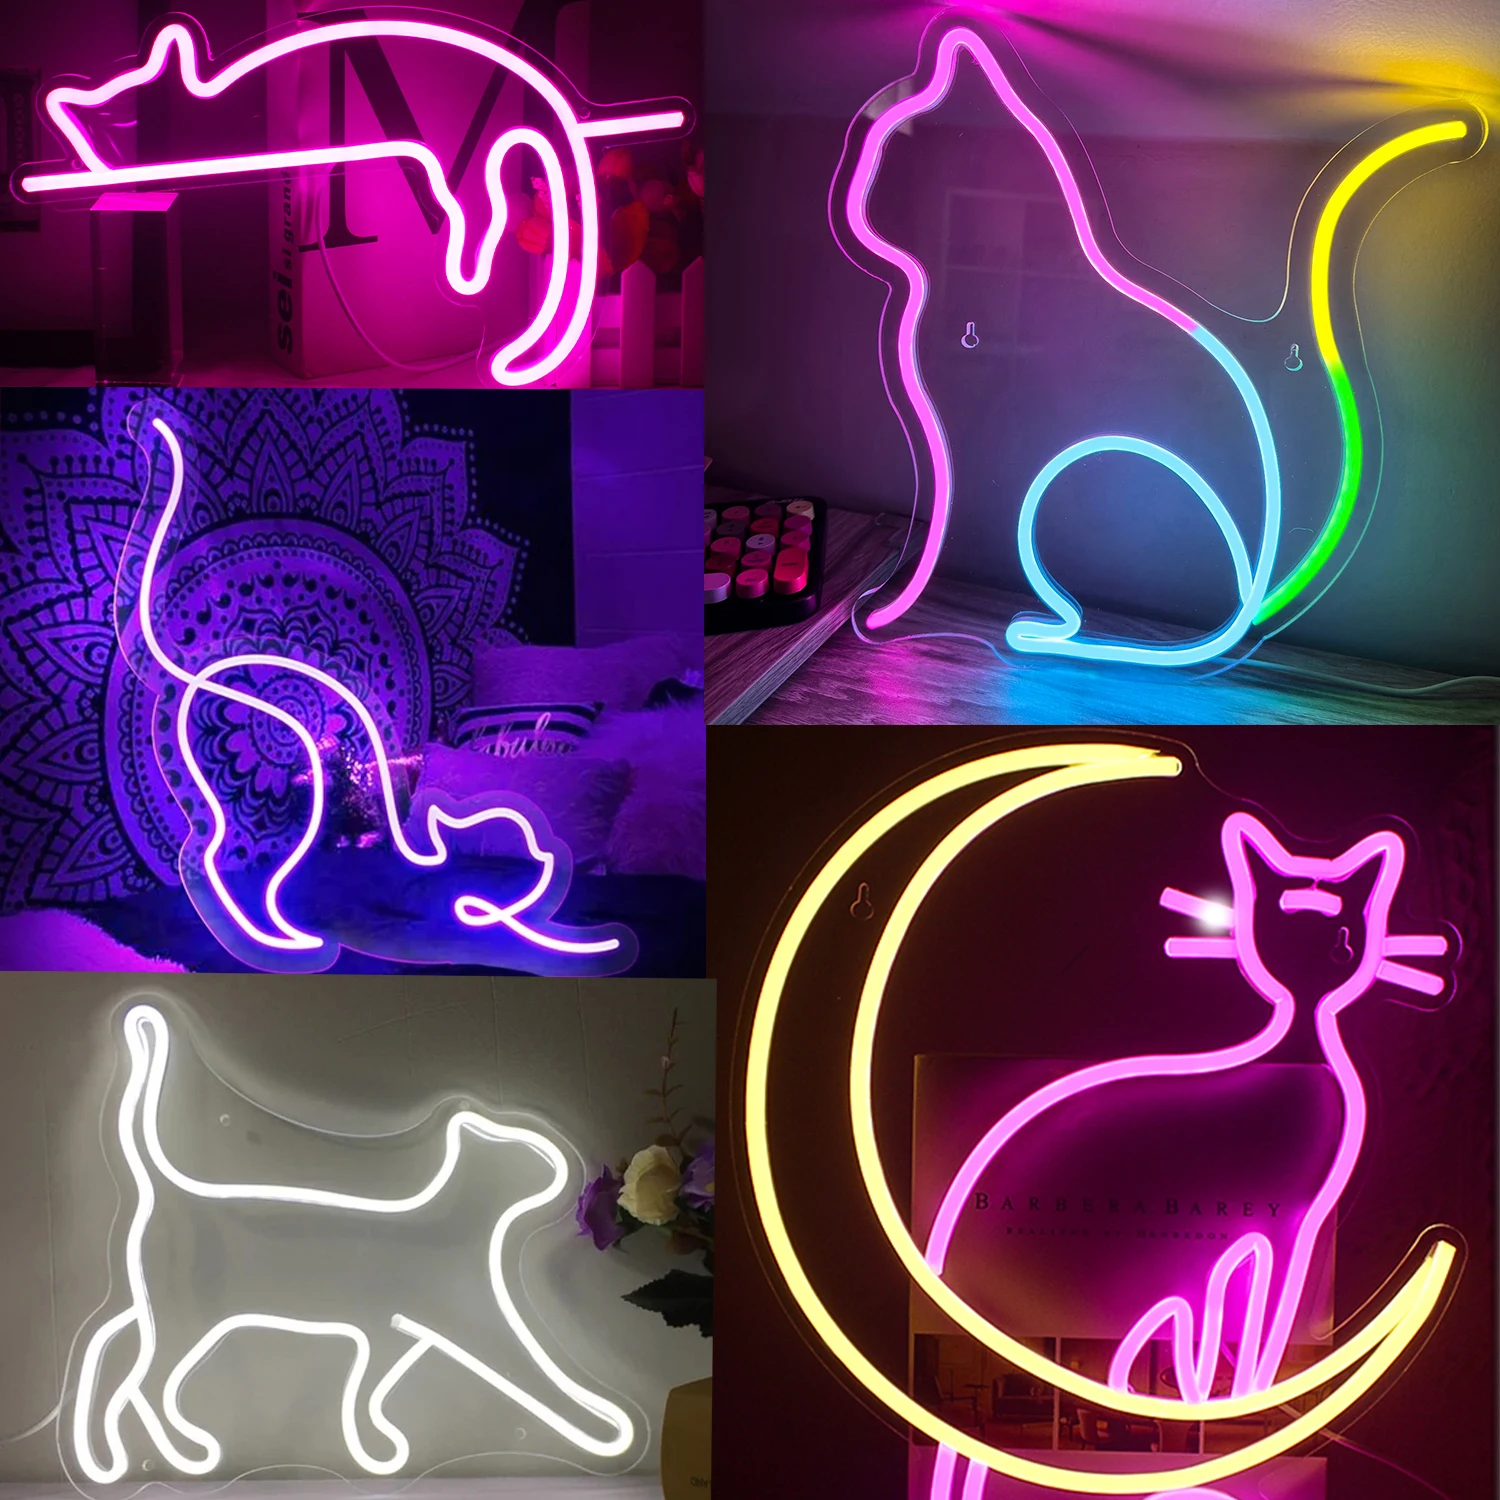 Wanxing Lazy Cat Anime Cartoon Neon Sign Led Light Custom Light Party Home Child Room Engagement Pet Animal Wall Decoration Gift